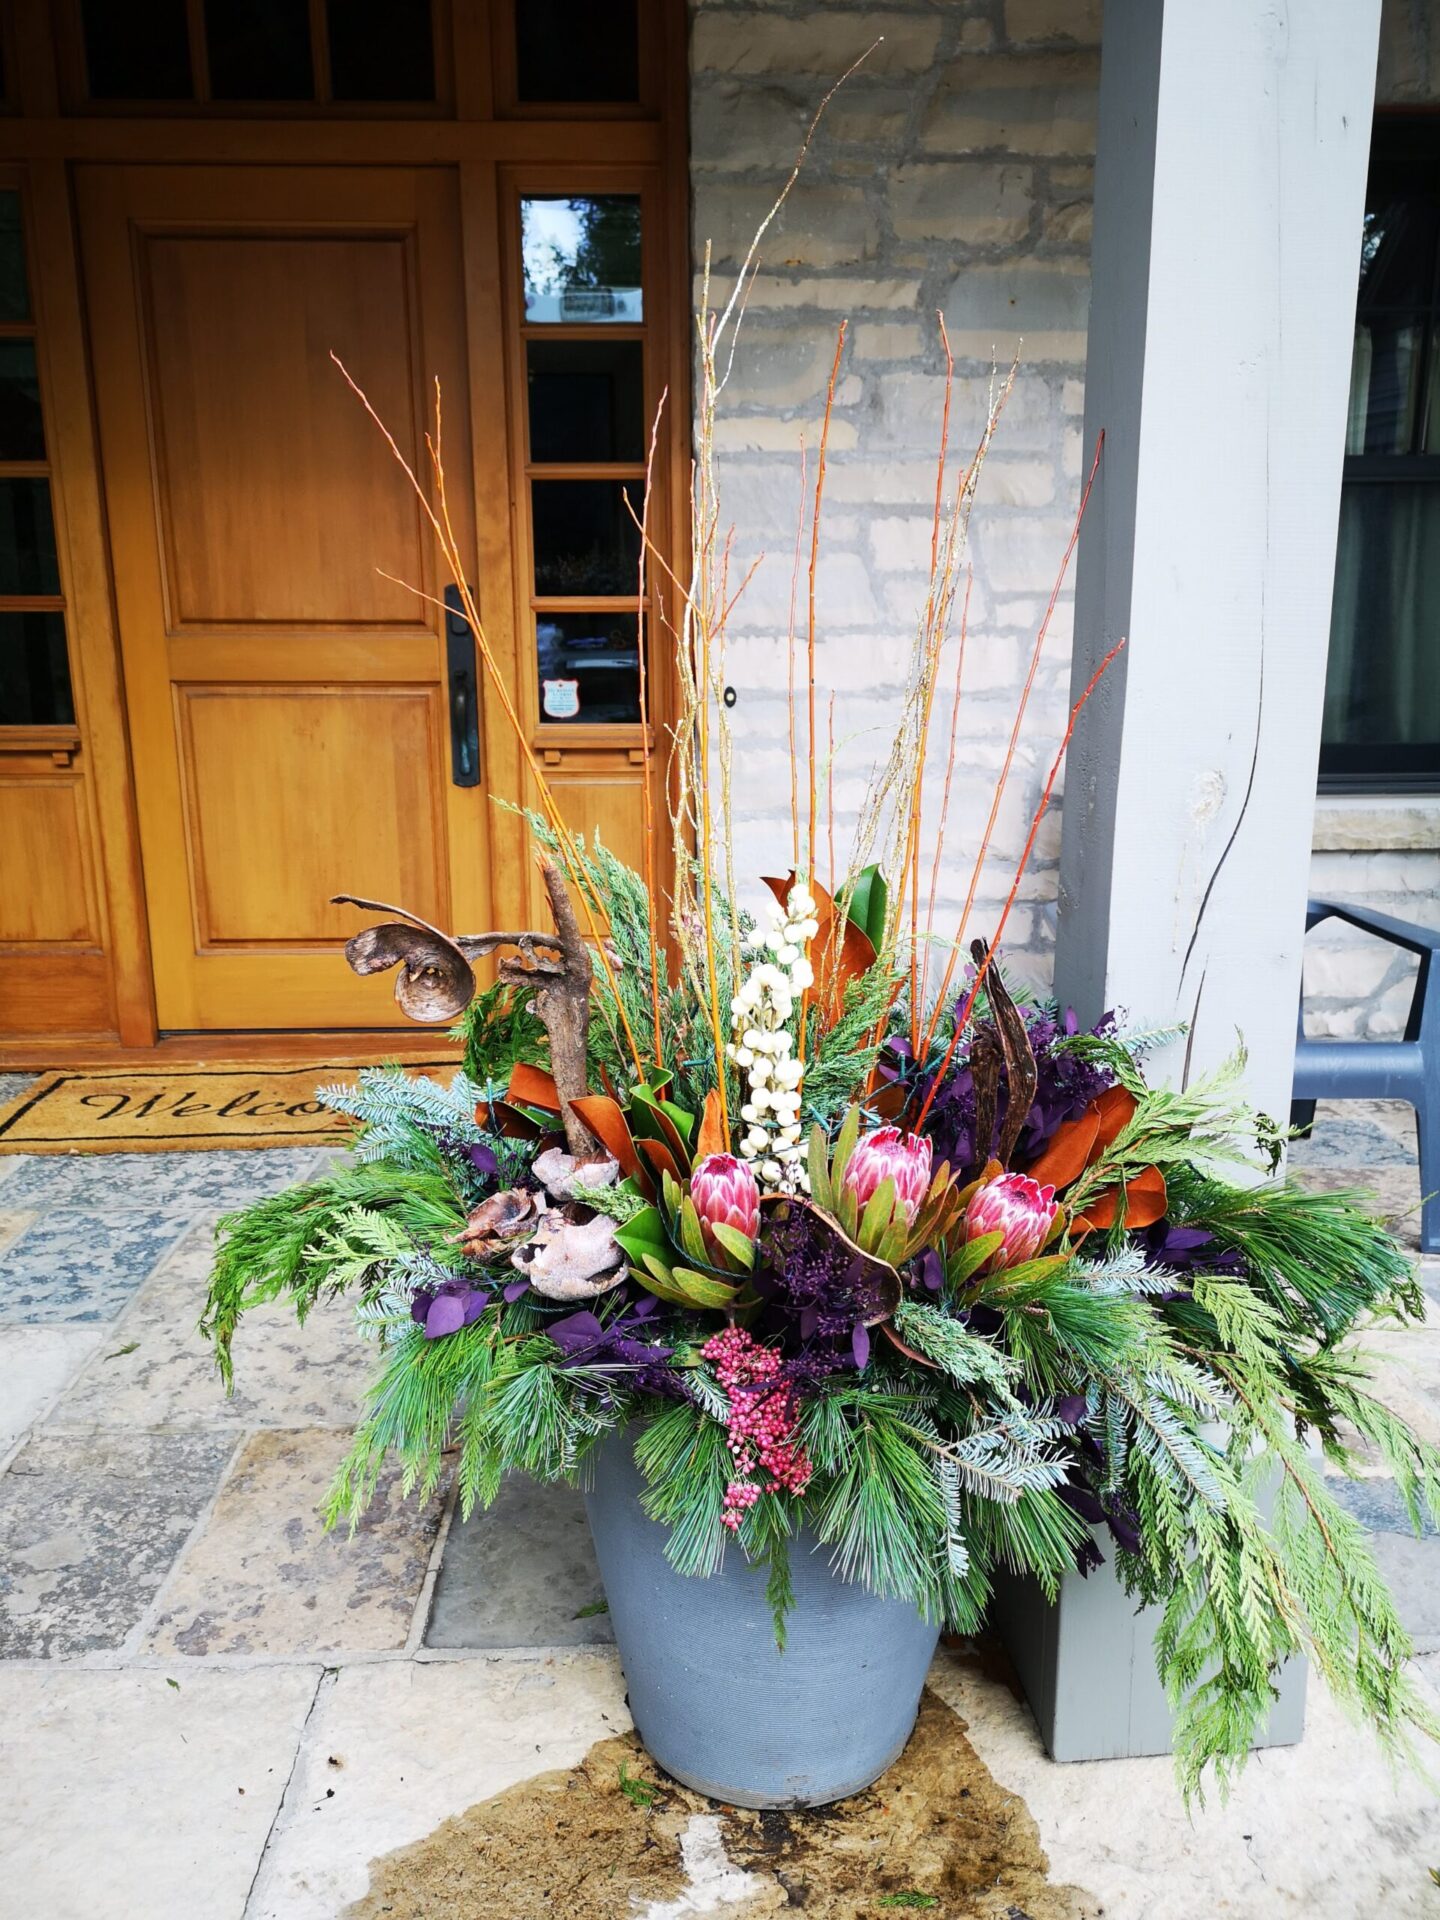 This image shows a colorful floral arrangement in a gray pot at a doorway, featuring greenery, berries, and twigs, creating a welcoming atmosphere.